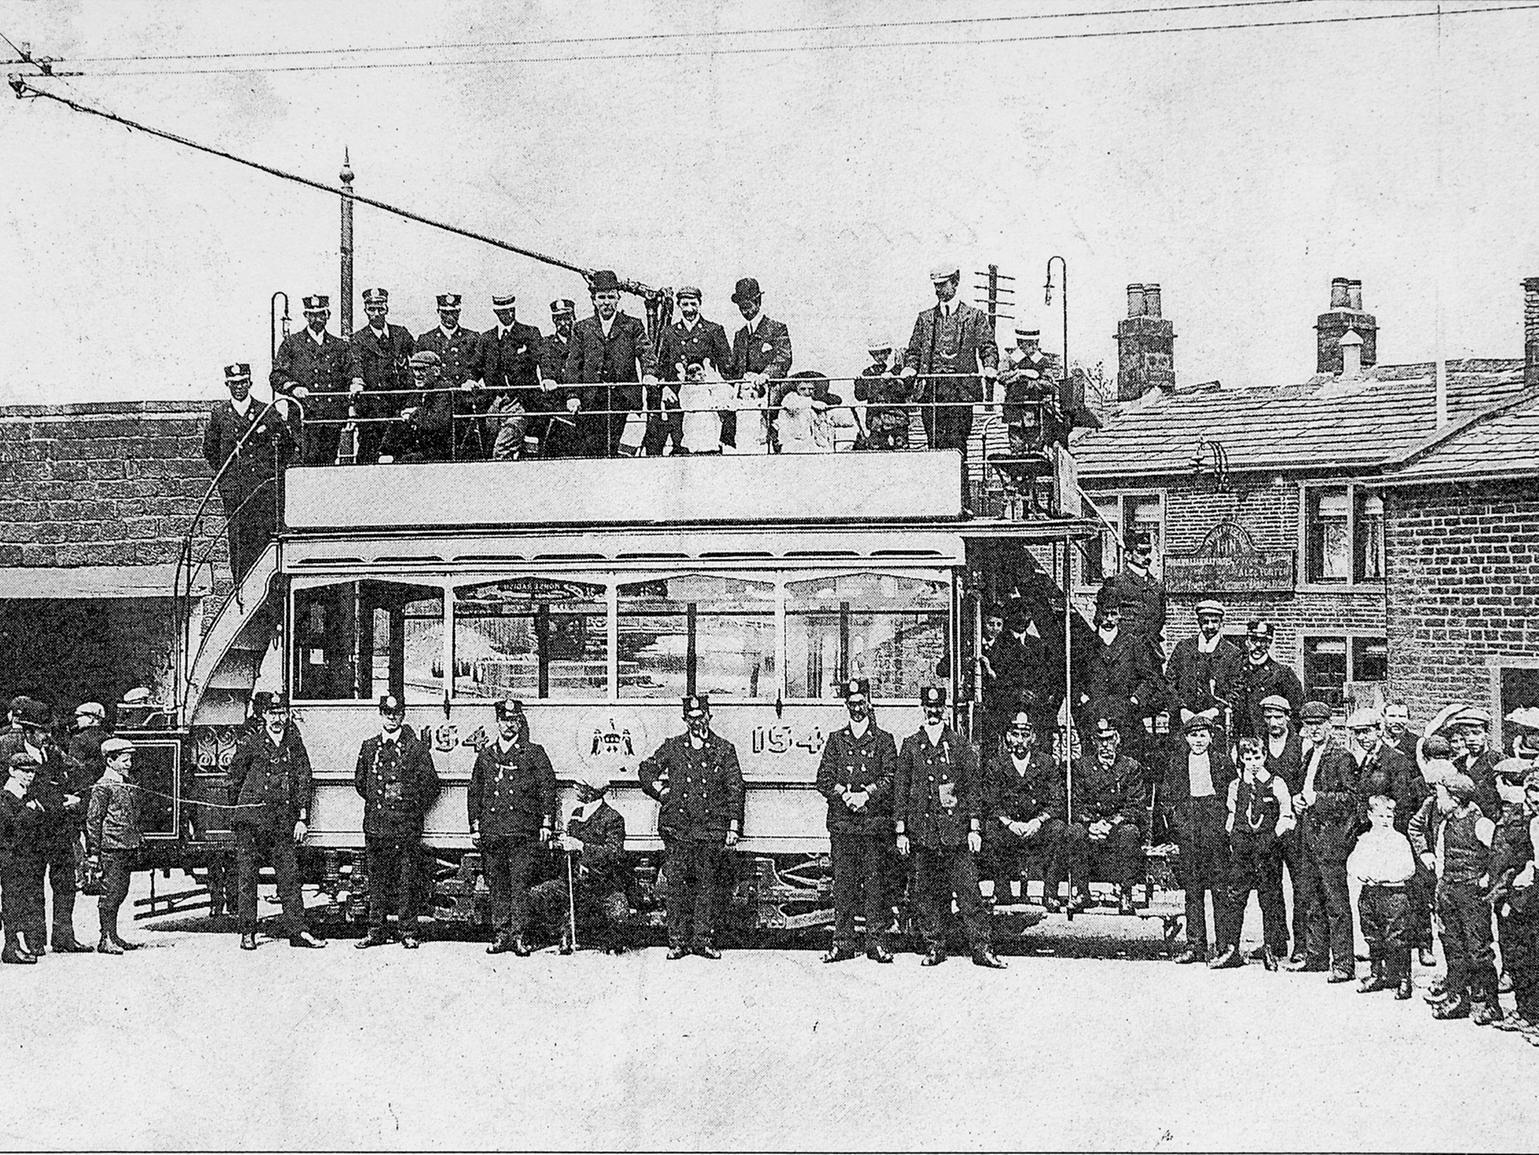 These smartly turned out Leeds City Transport employees turned up on the first electric tram to Rodley. Behind the tram and to the right was the Three Horseshoes pub, later renamed as the Rodley Barge. Year unknown 